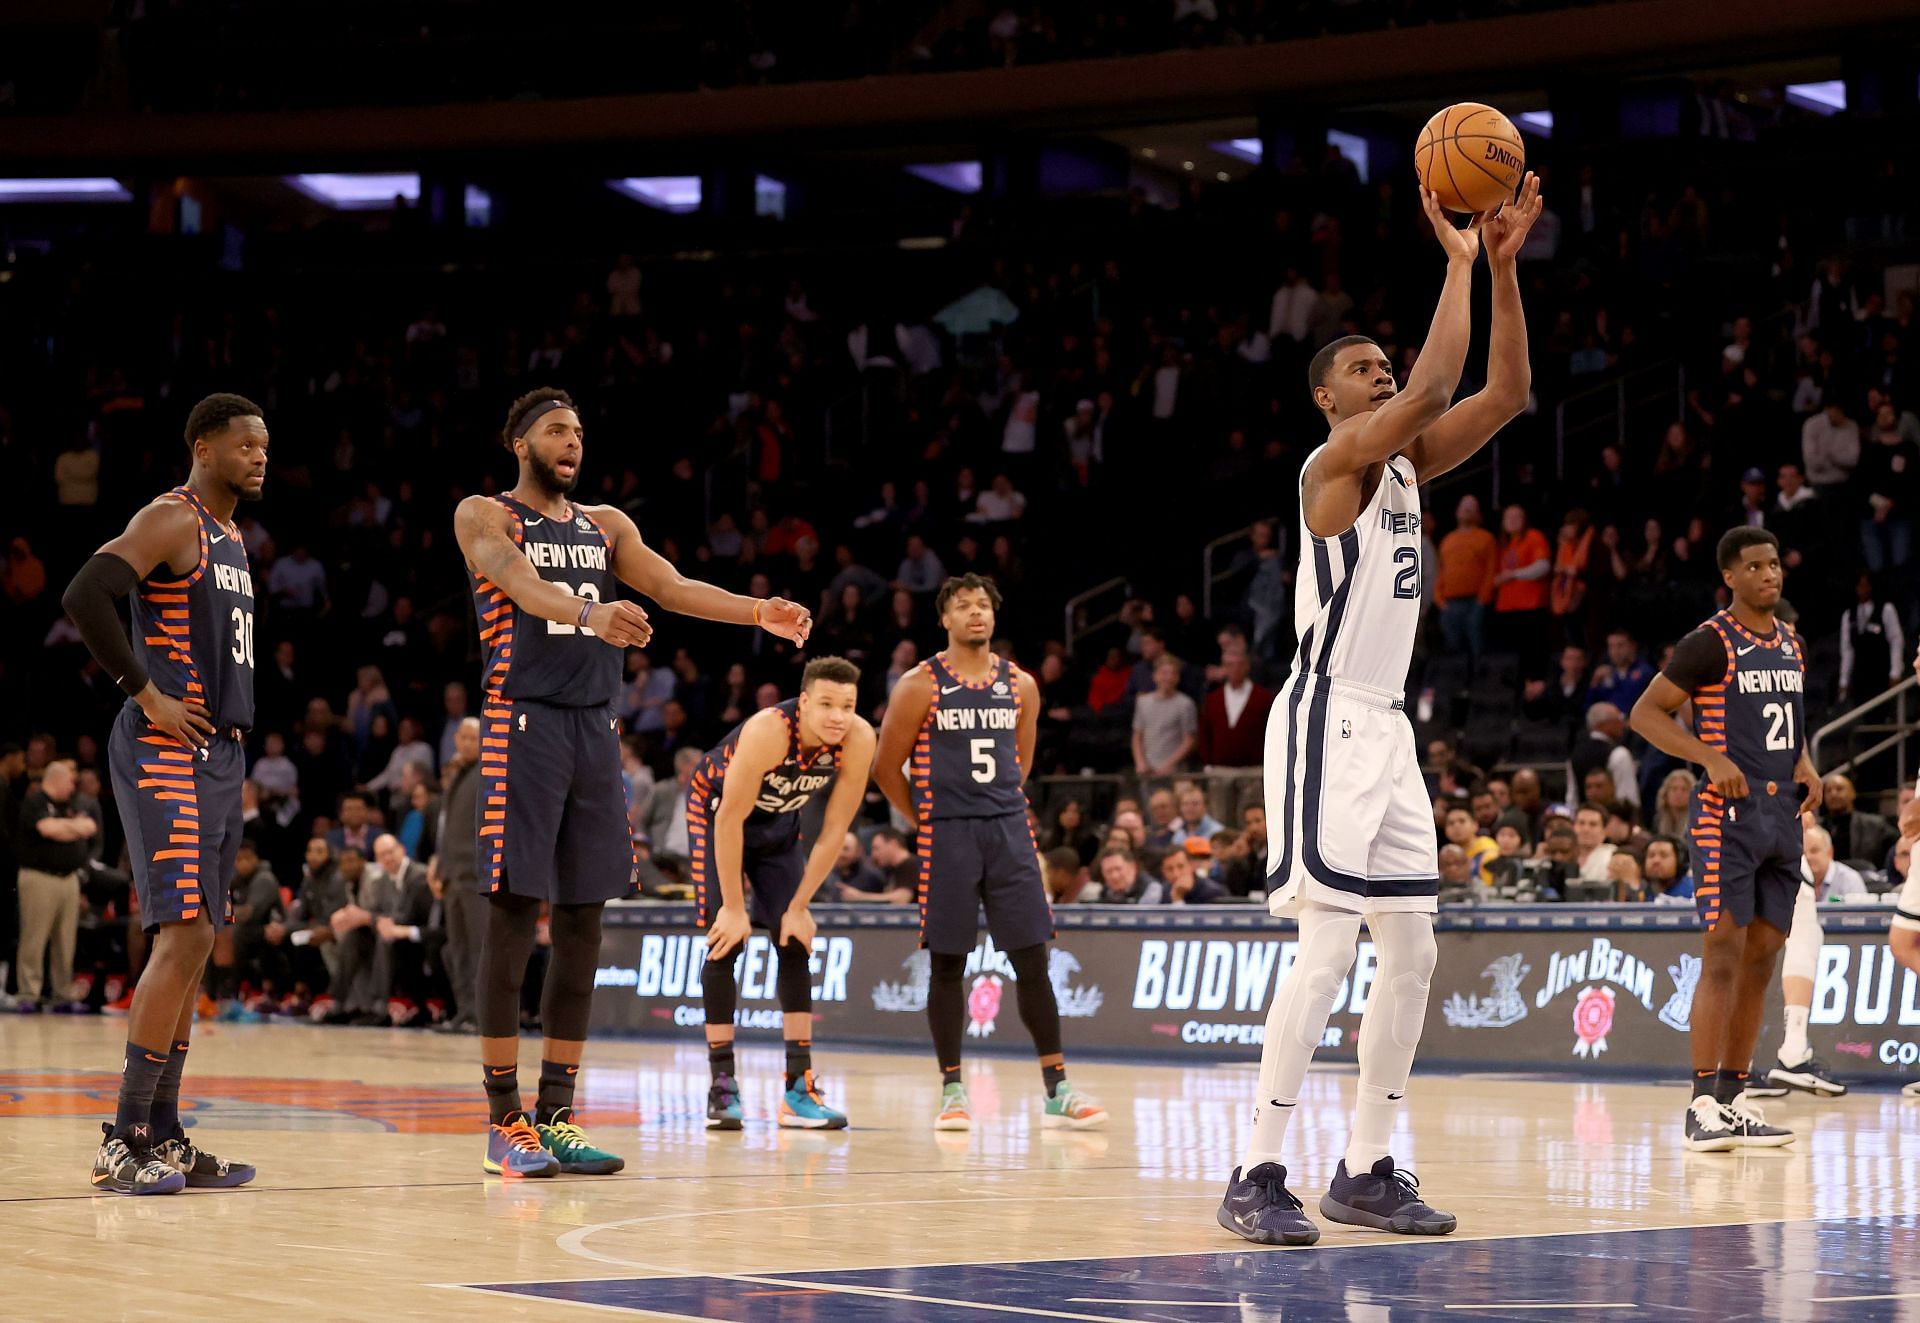 Memphis Grizzlies will play the New York Knicks on Wednesday.